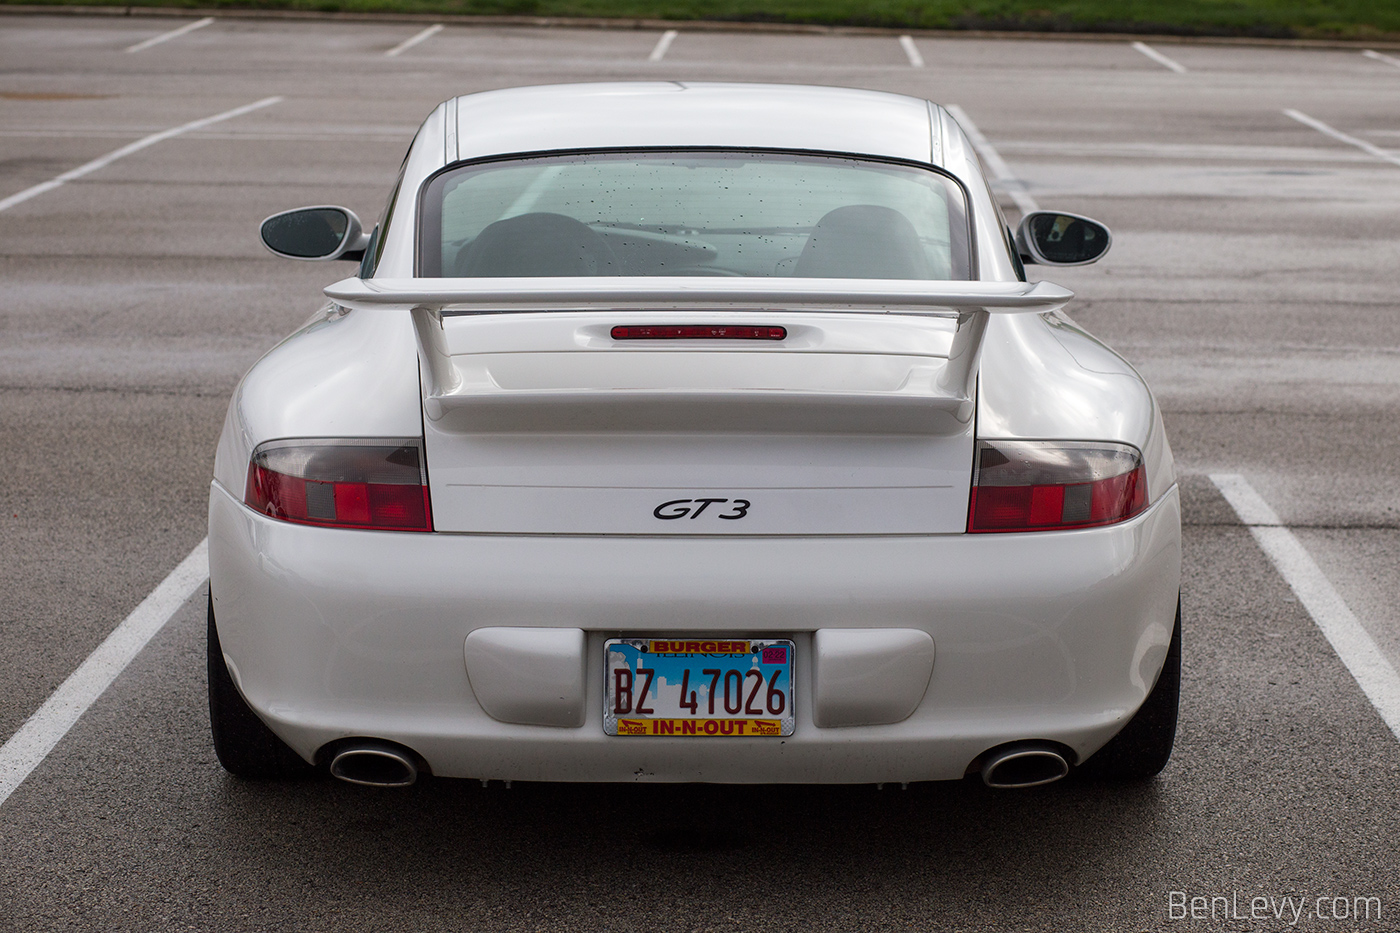 Rear end of White 996 GT3